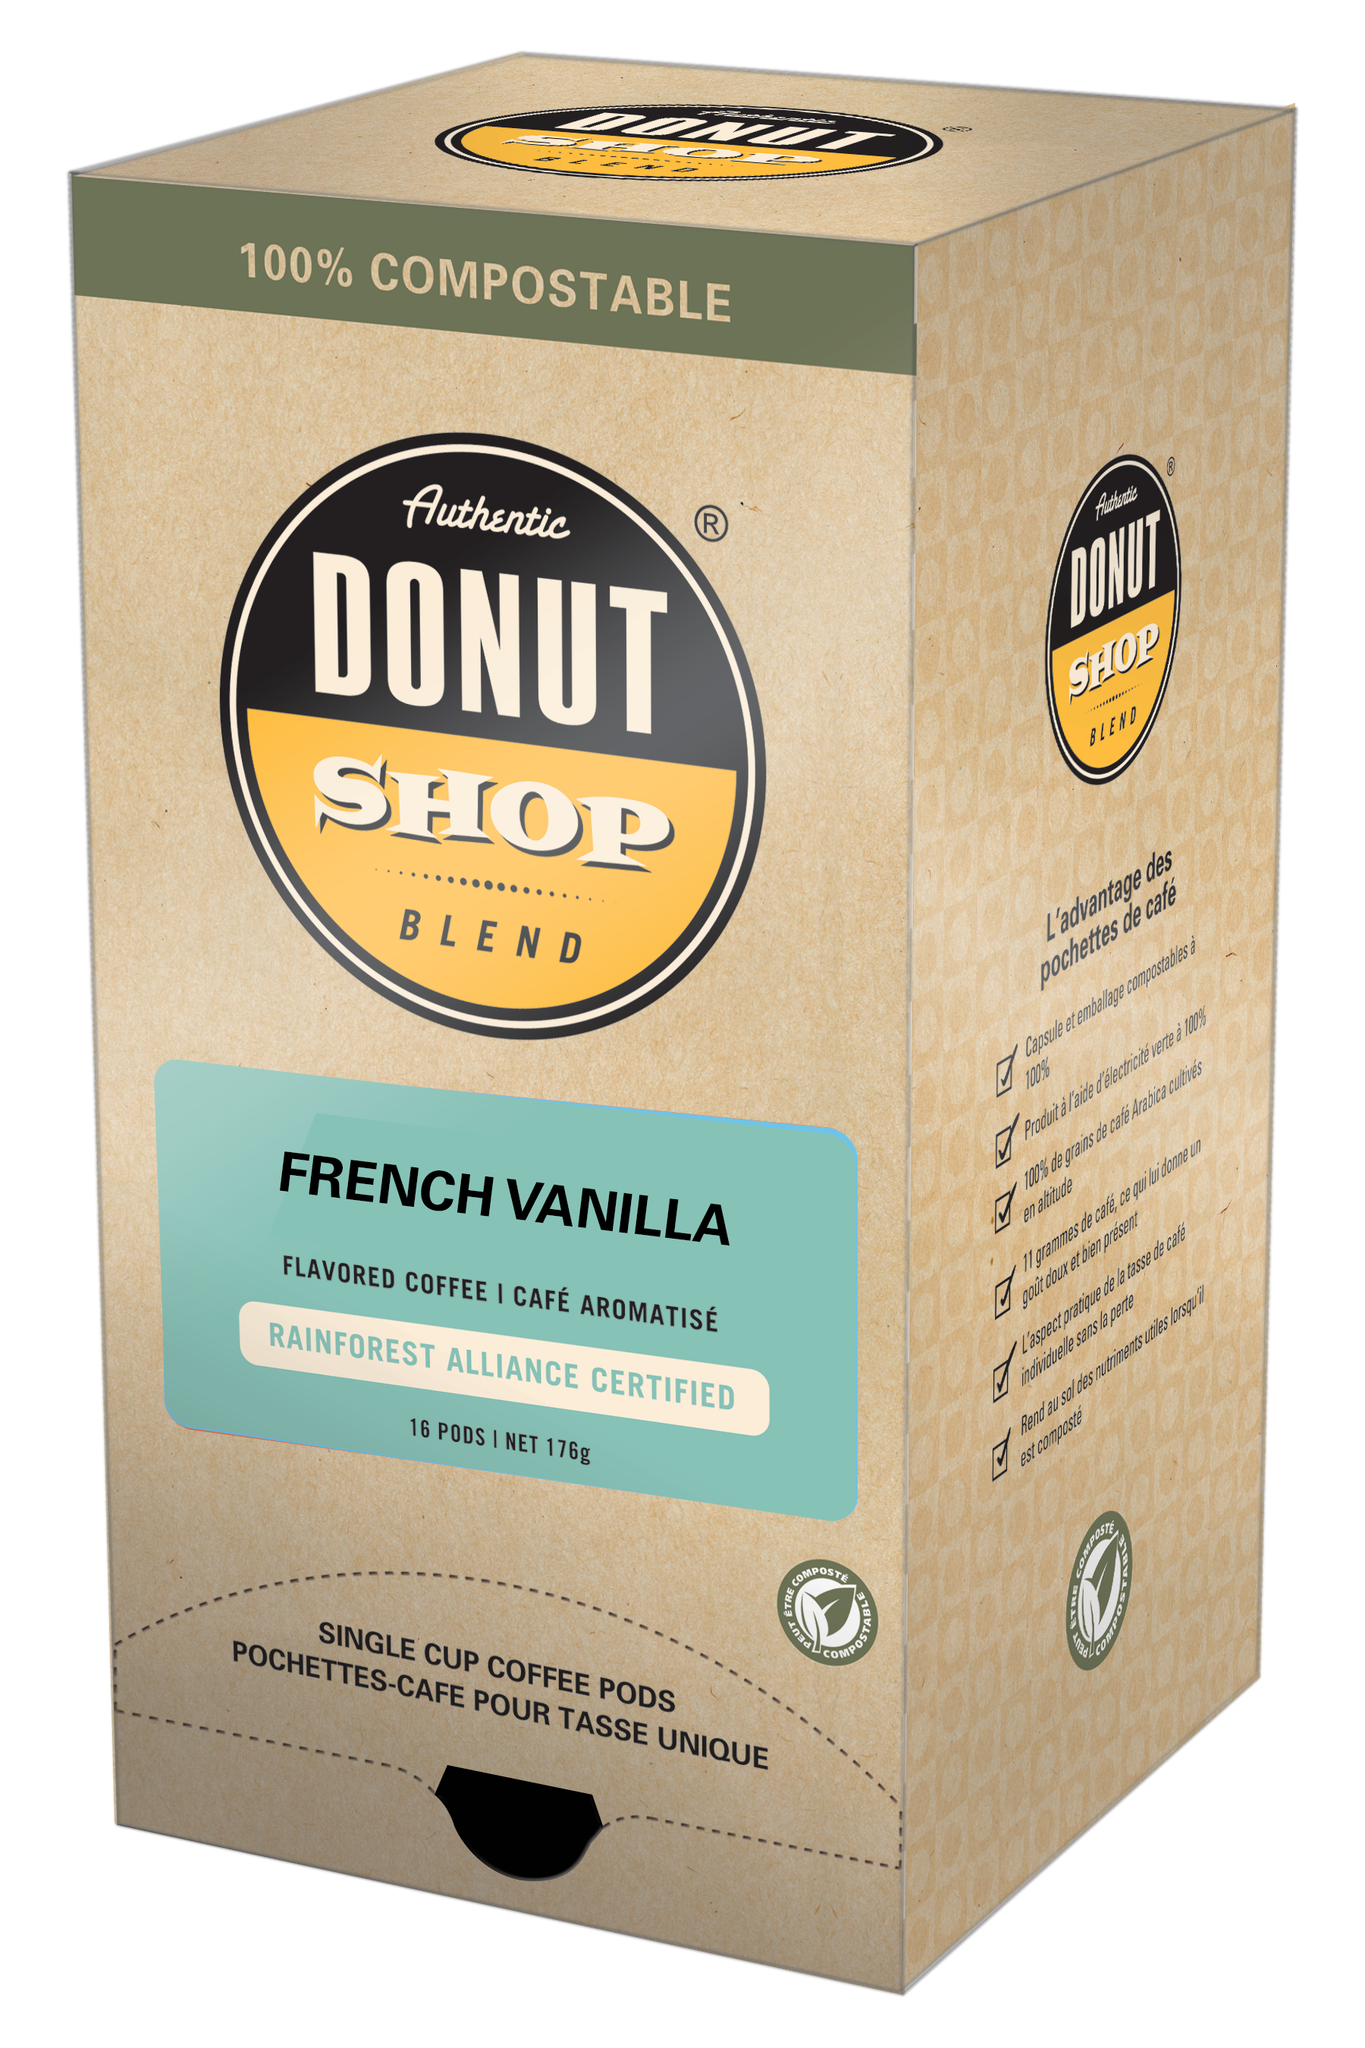 Not Keurig Compatible: Reunion Island 100% Compostable Pods - French Vanilla [16 pack]